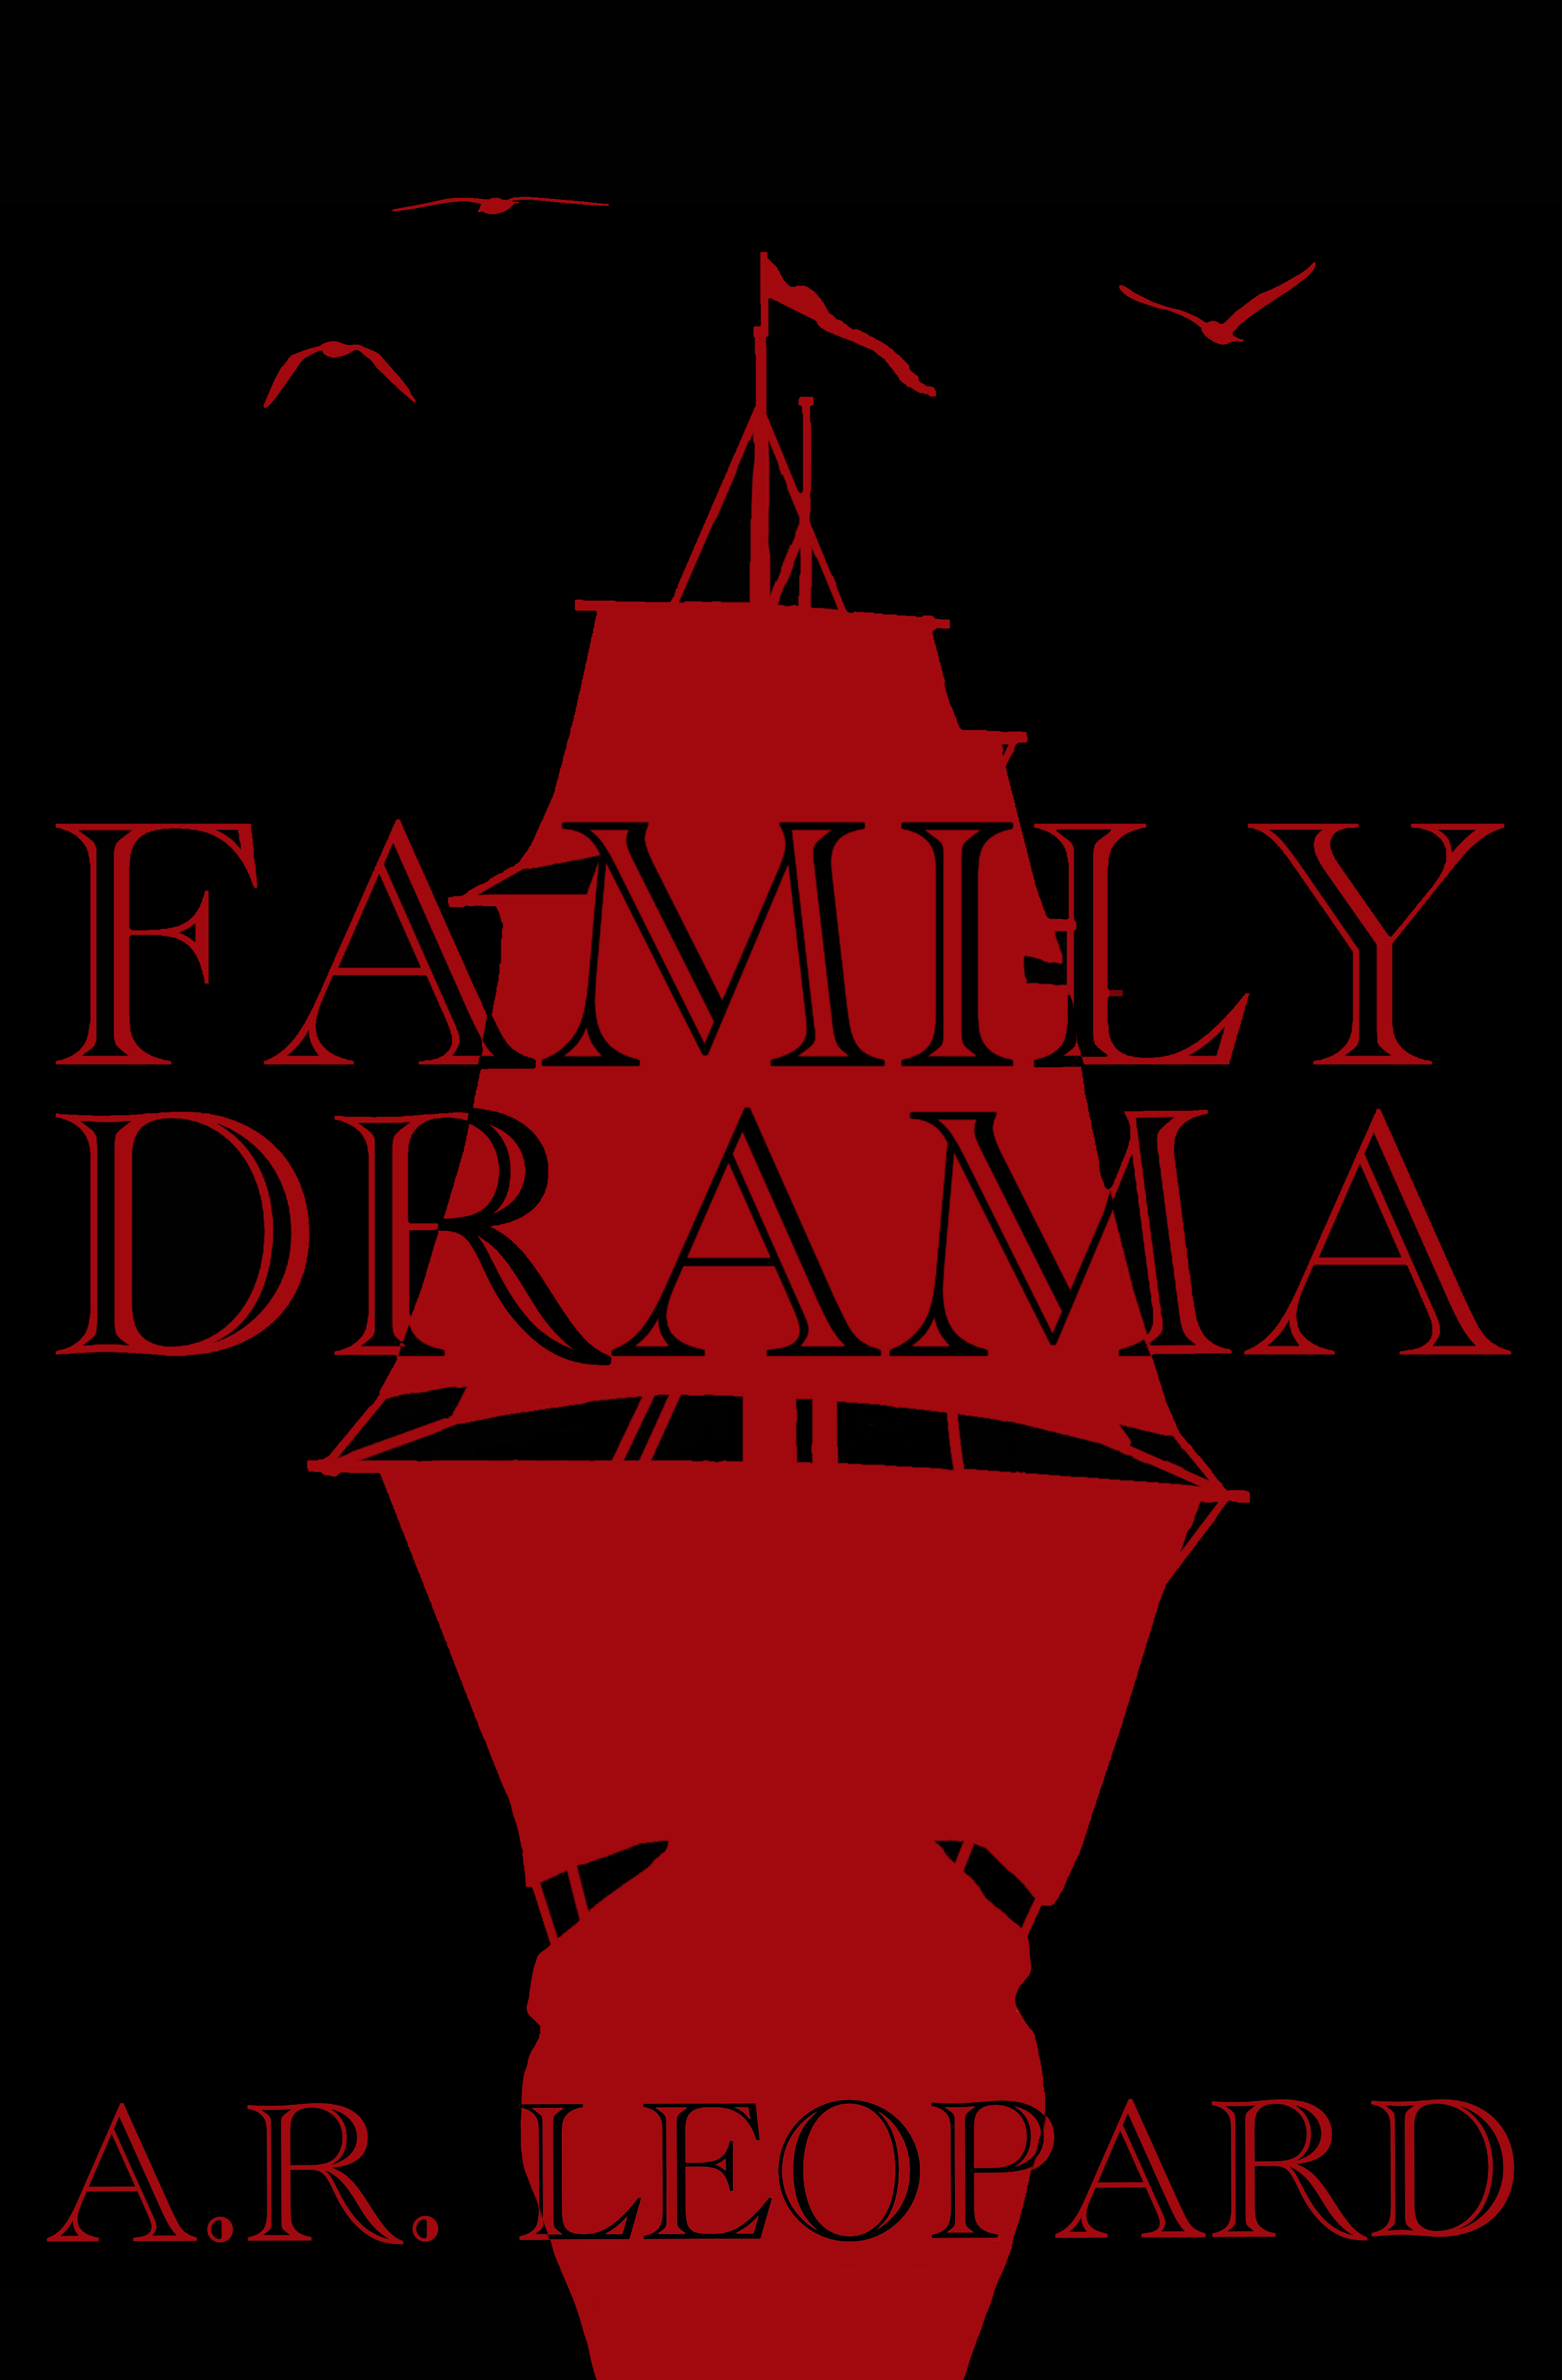 FREE: Family Drama by A. R. Leopard